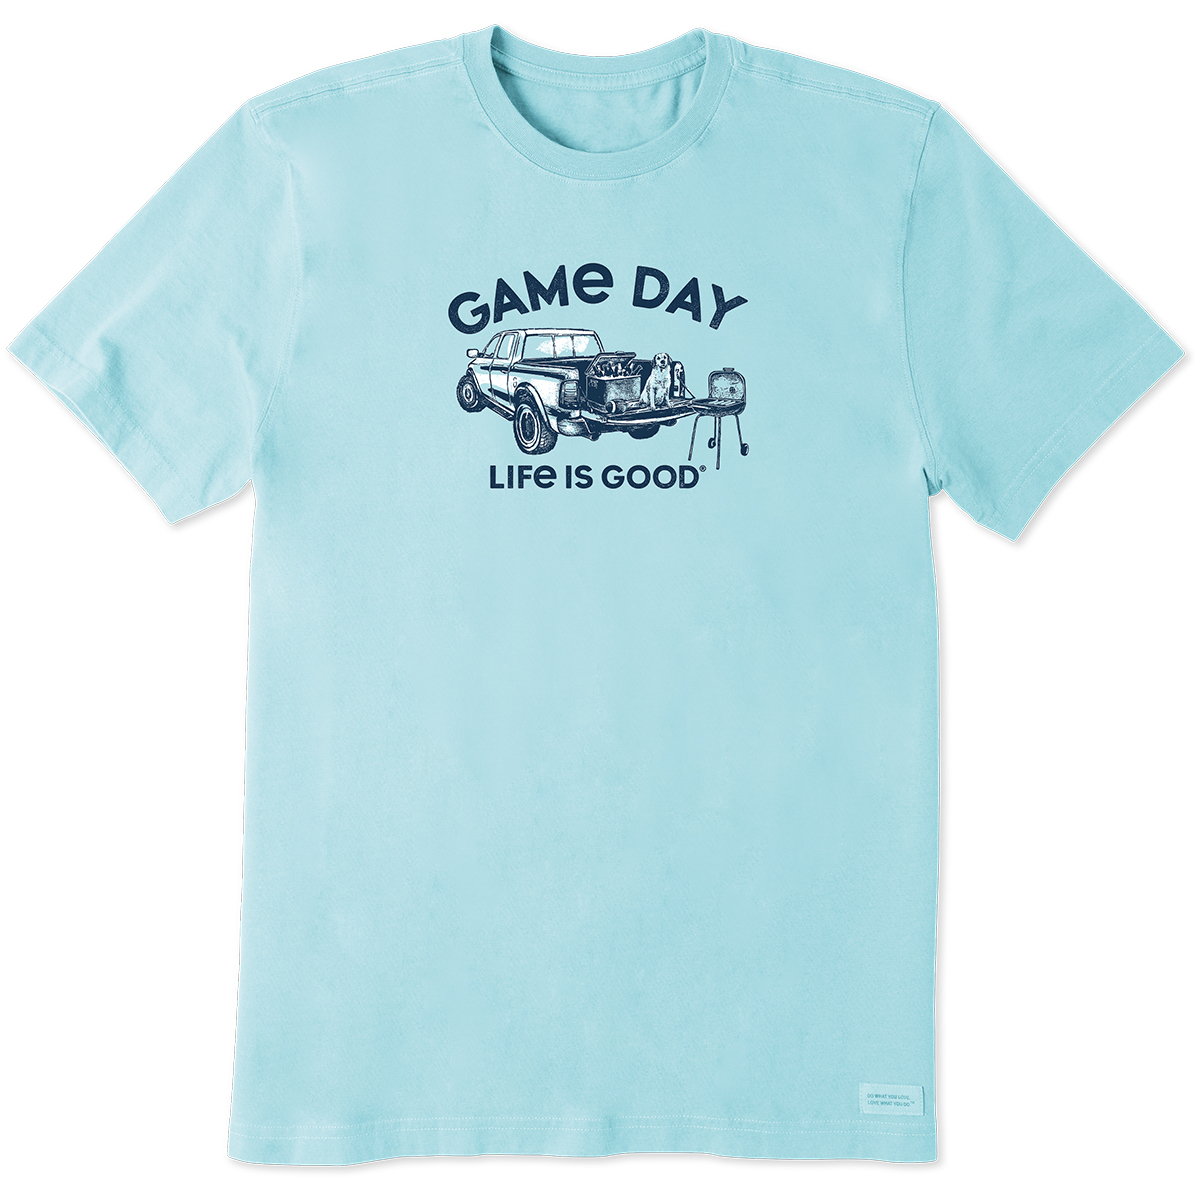 Life Is Good Men's Game Day Tee - Blue, L